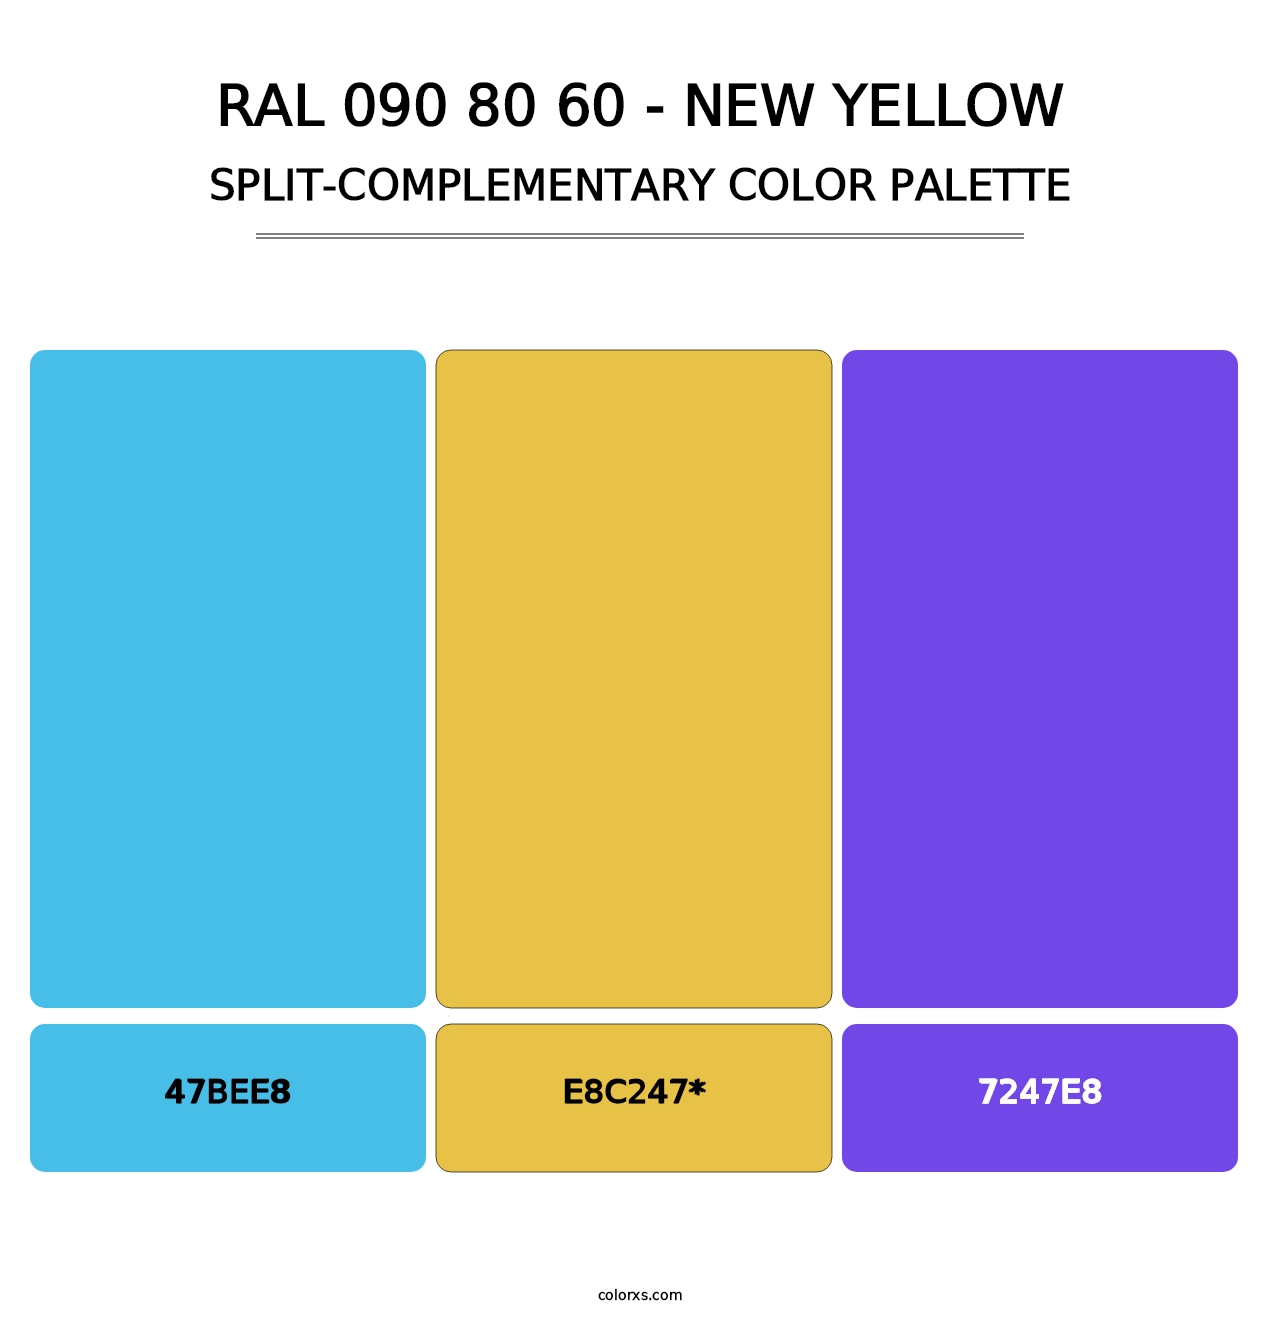 RAL 090 80 60 - New Yellow - Split-Complementary Color Palette